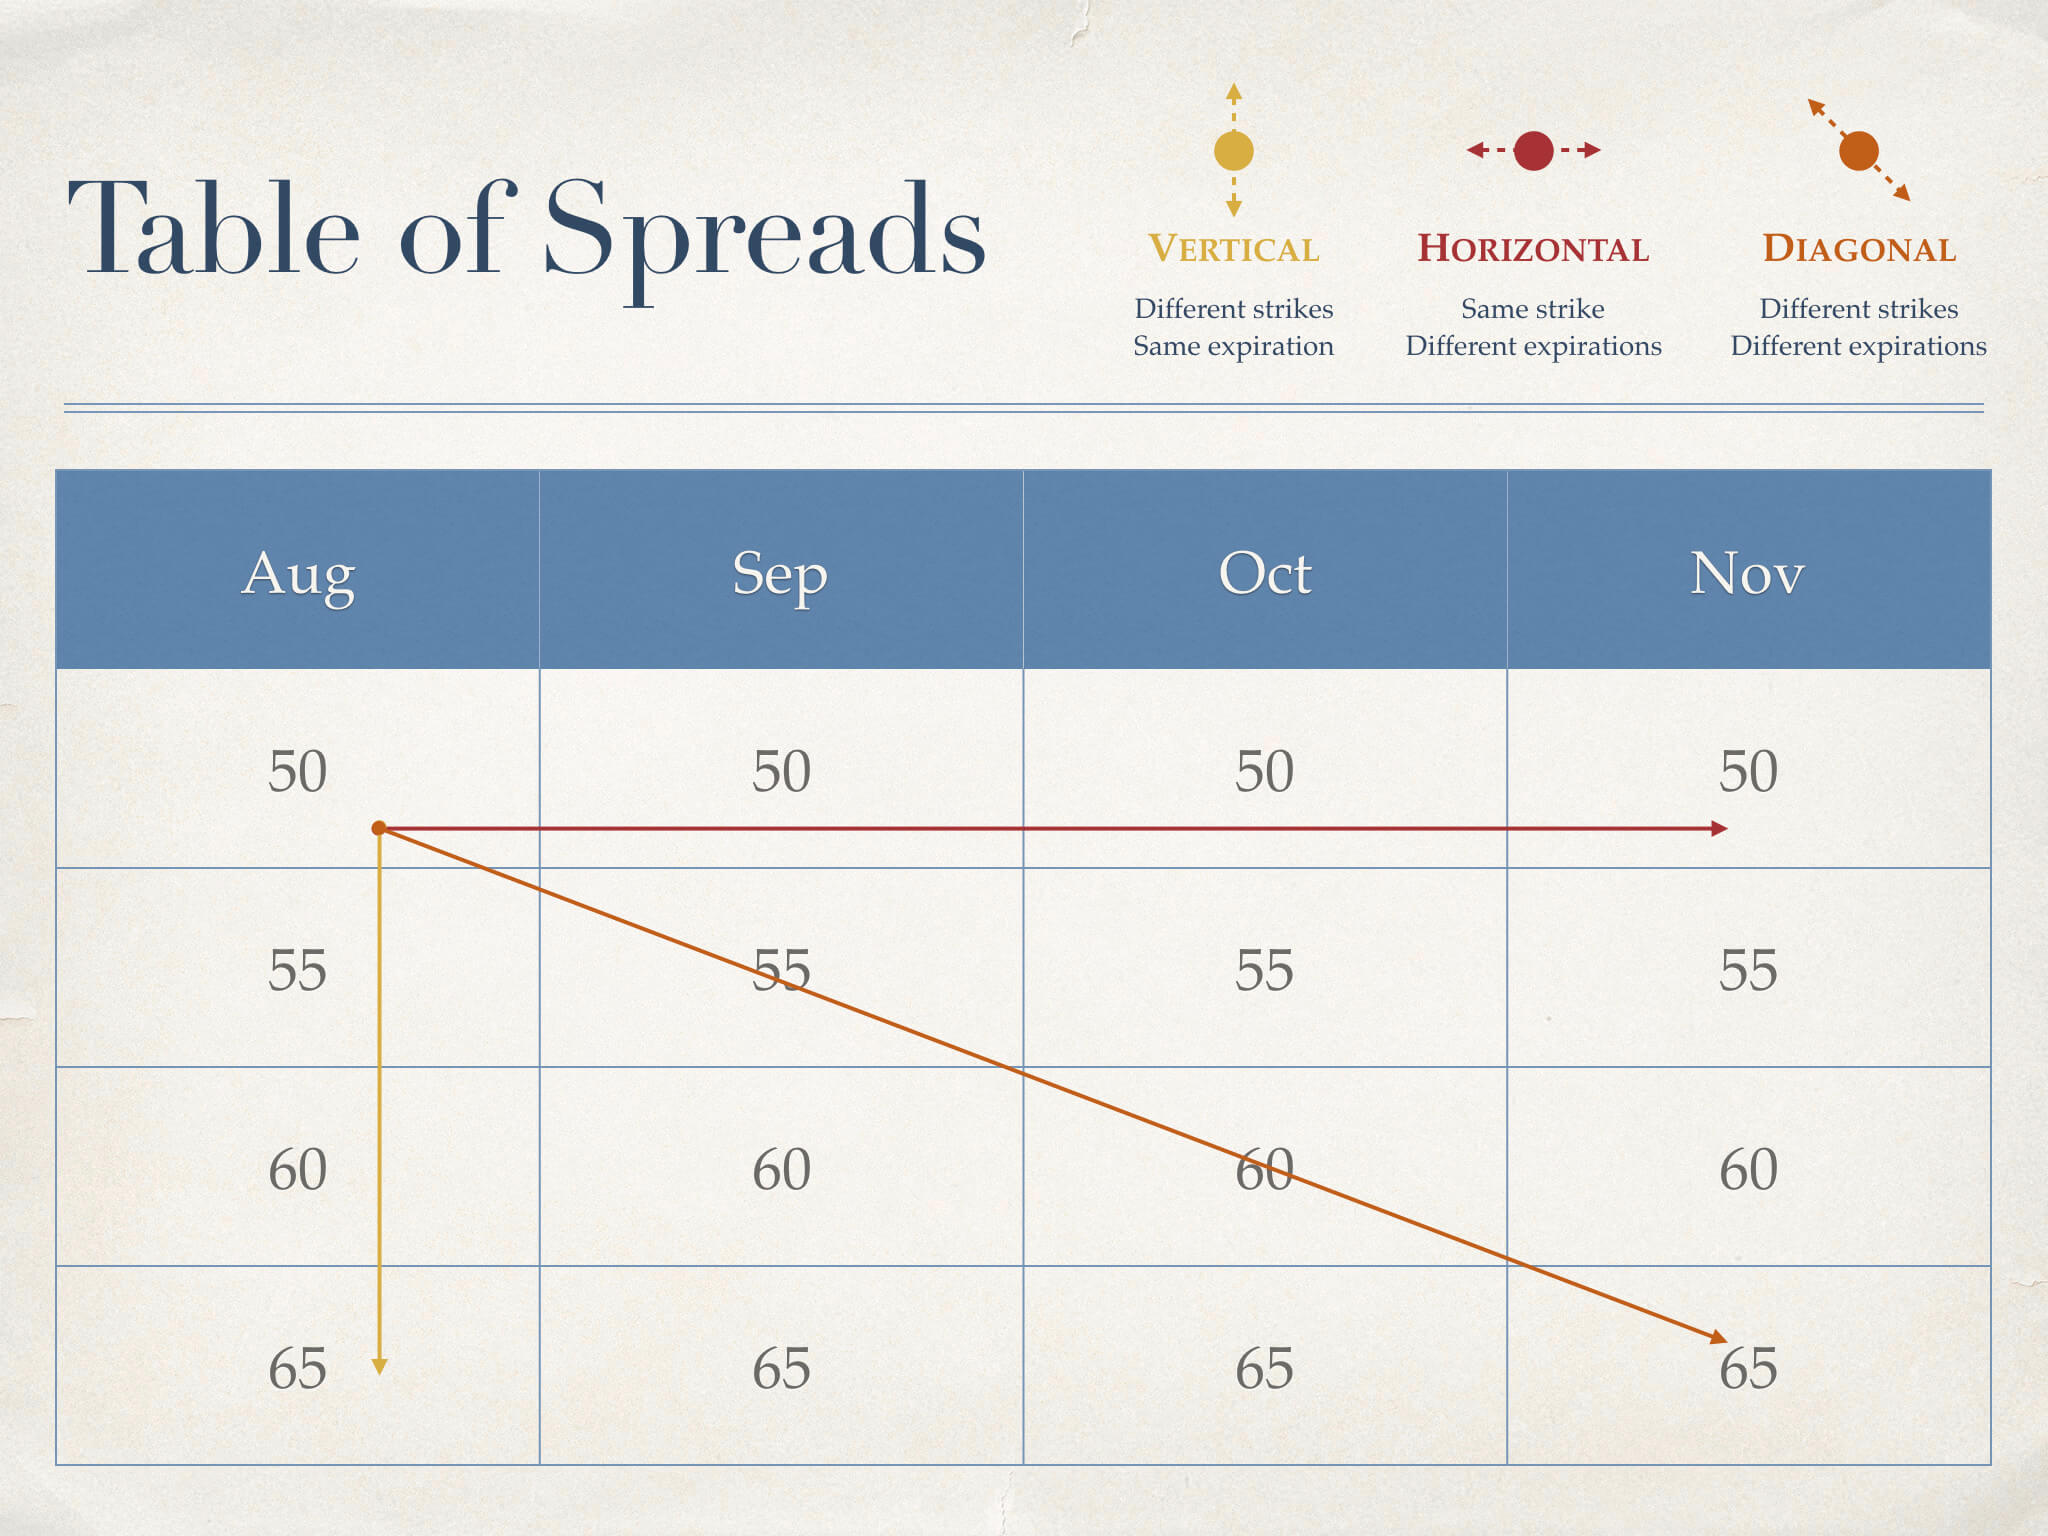 Table of Spreads